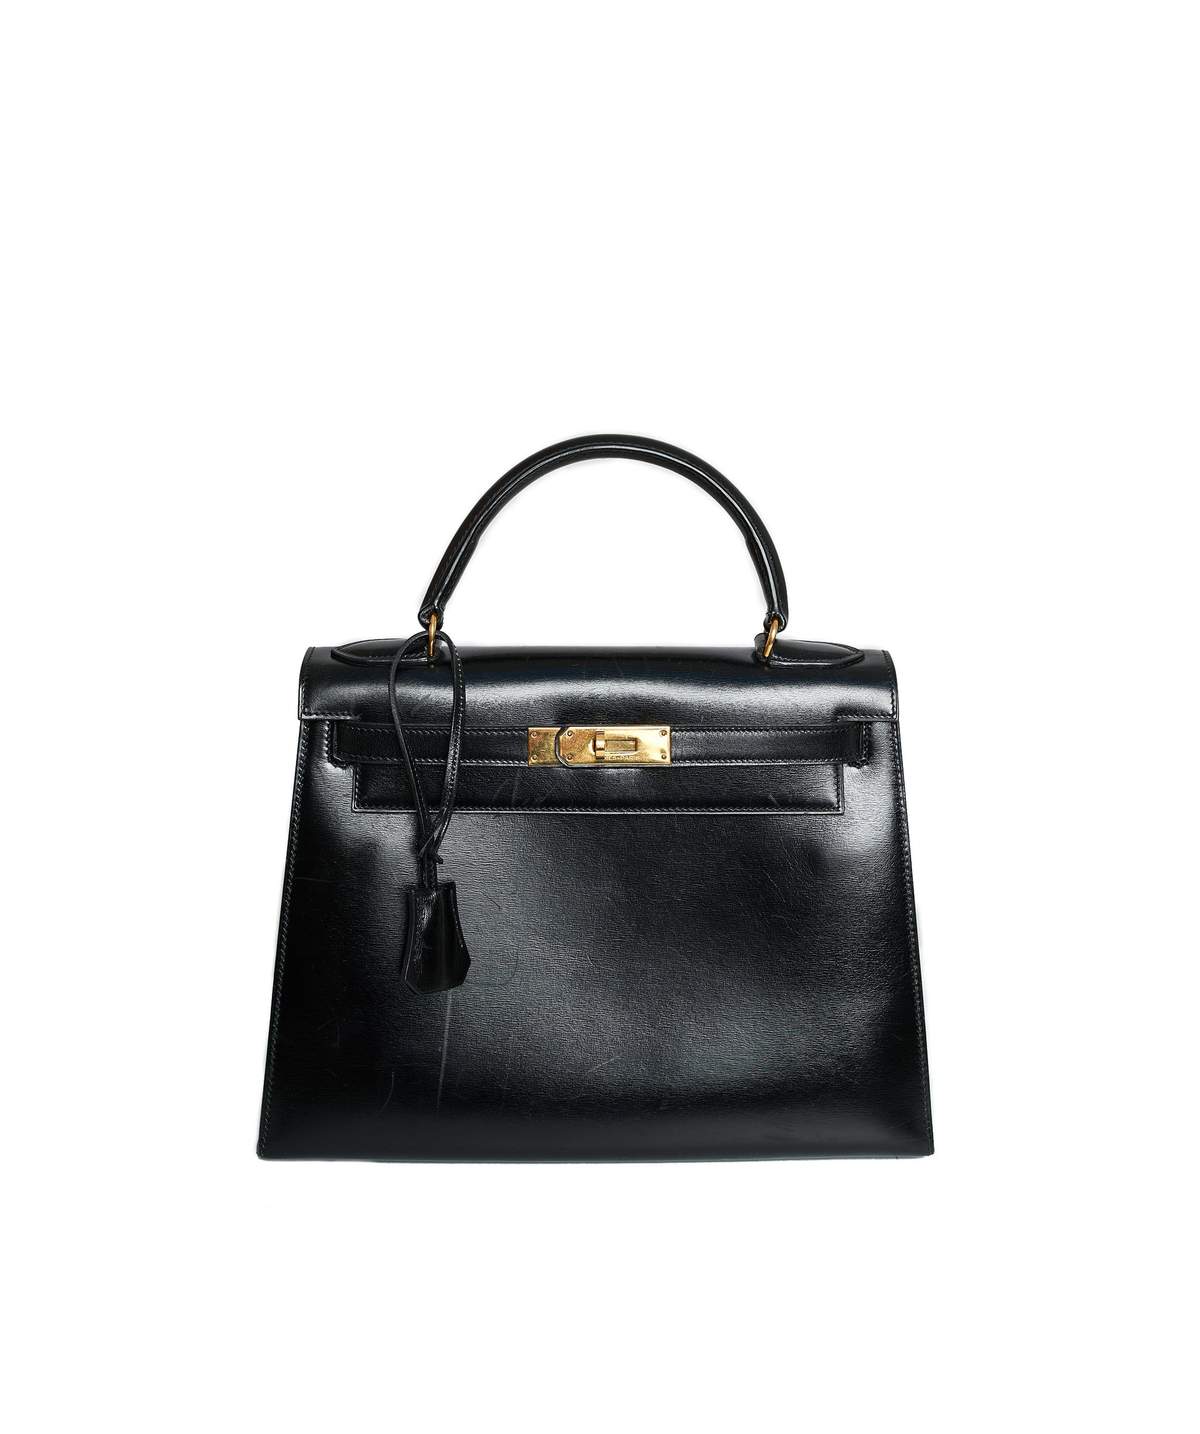 Sell Hermès Kelly Depeches 25 in Black Box Leather with GHW - Black